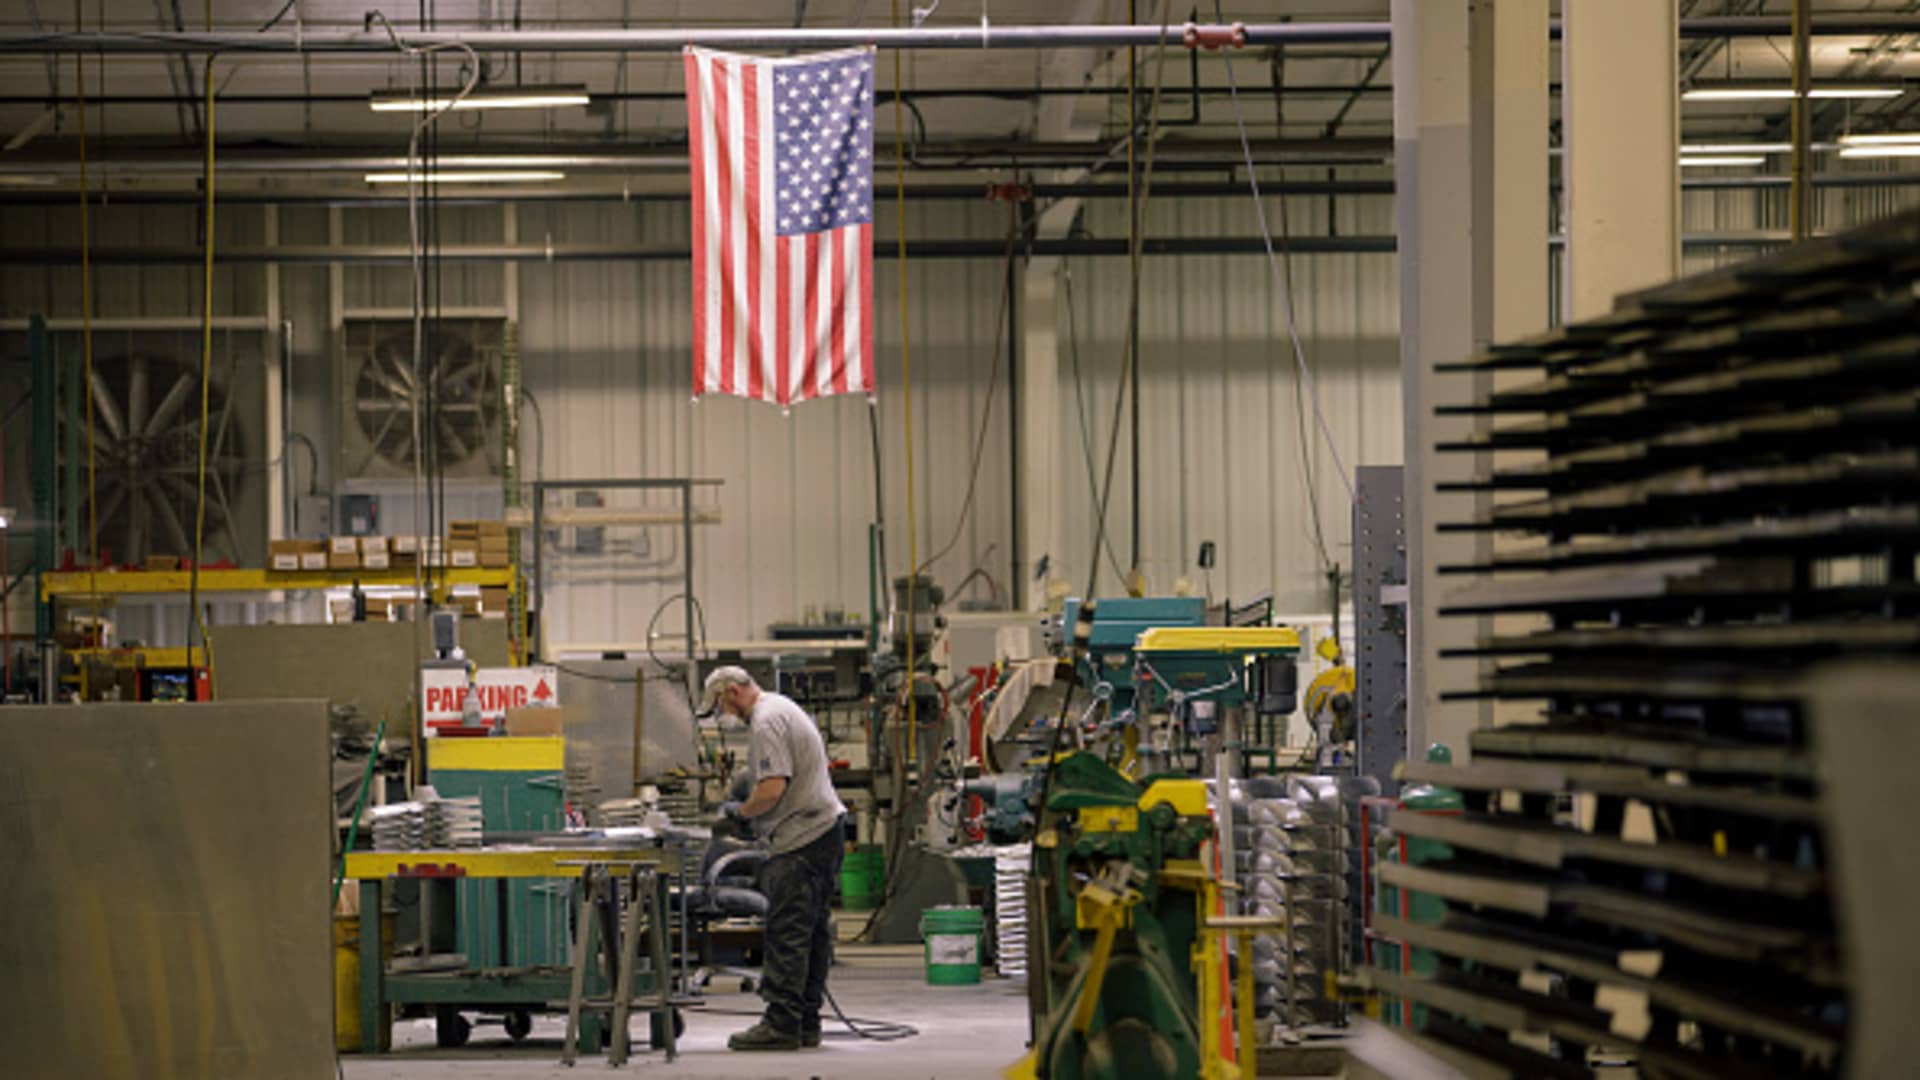 'Early innings' of a US manufacturing boom: CEO of Tema ETFs